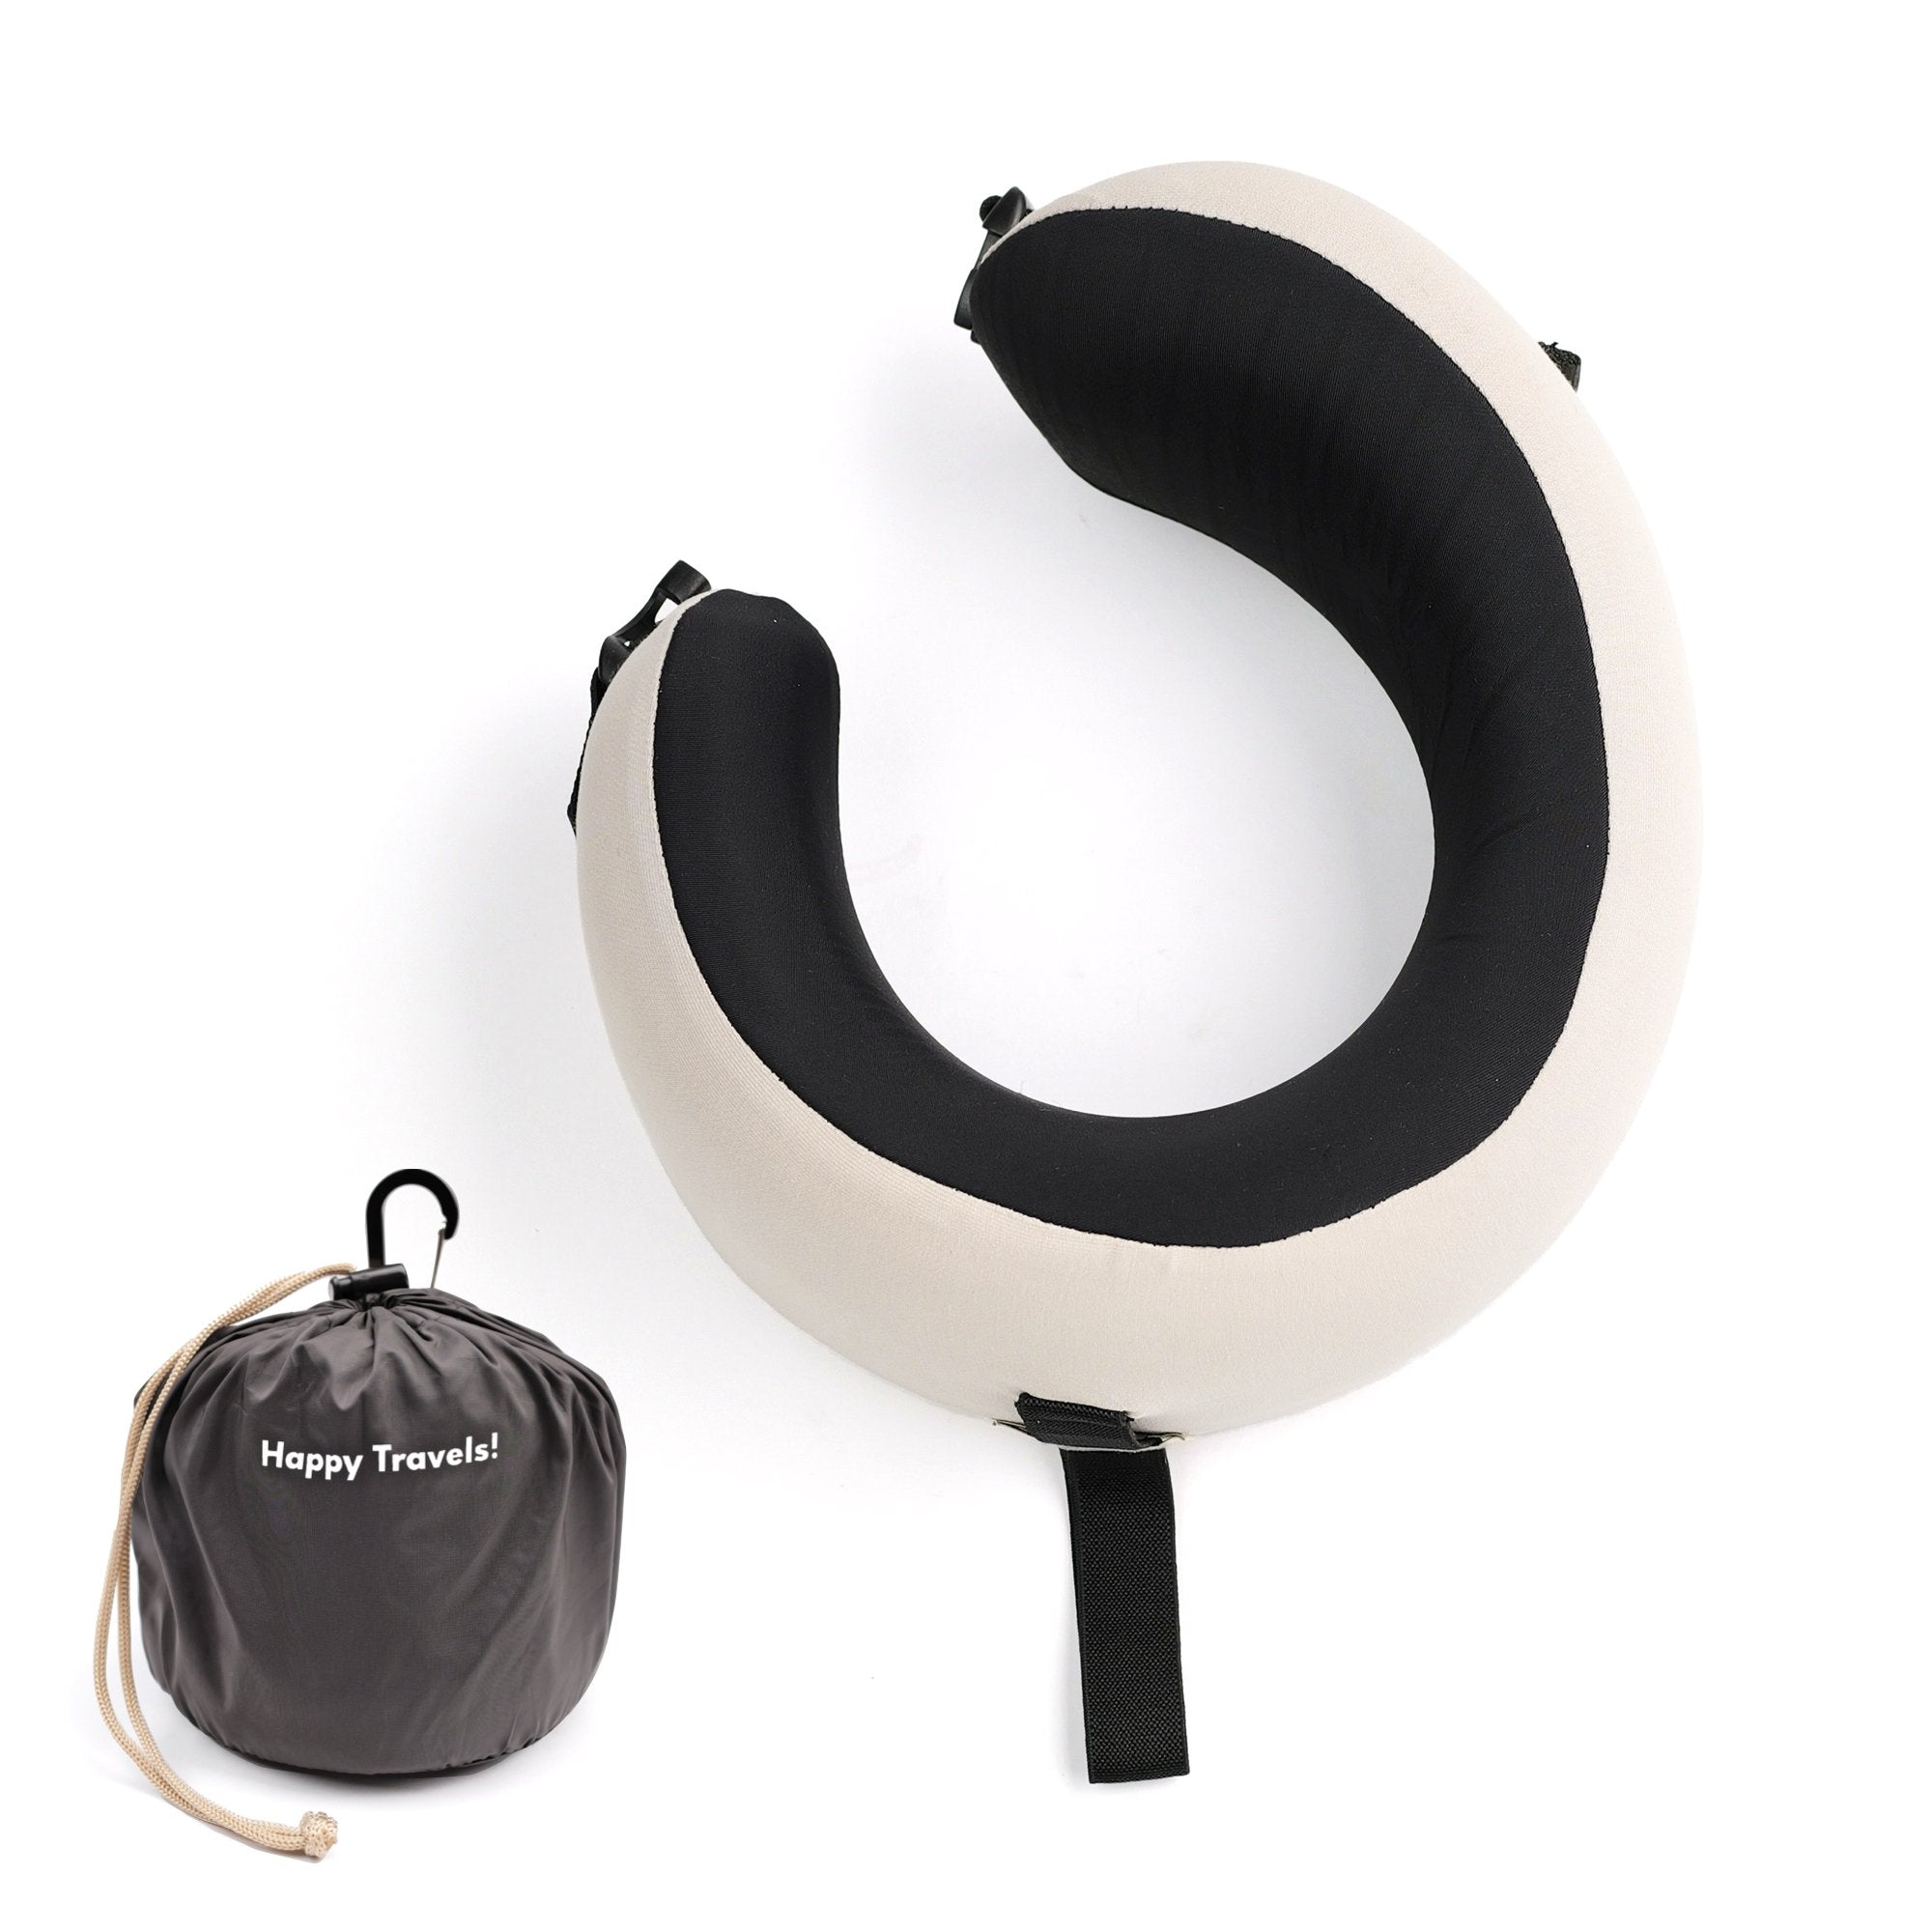 Under $25 scores: Travel comfortably with this Target neck pillow